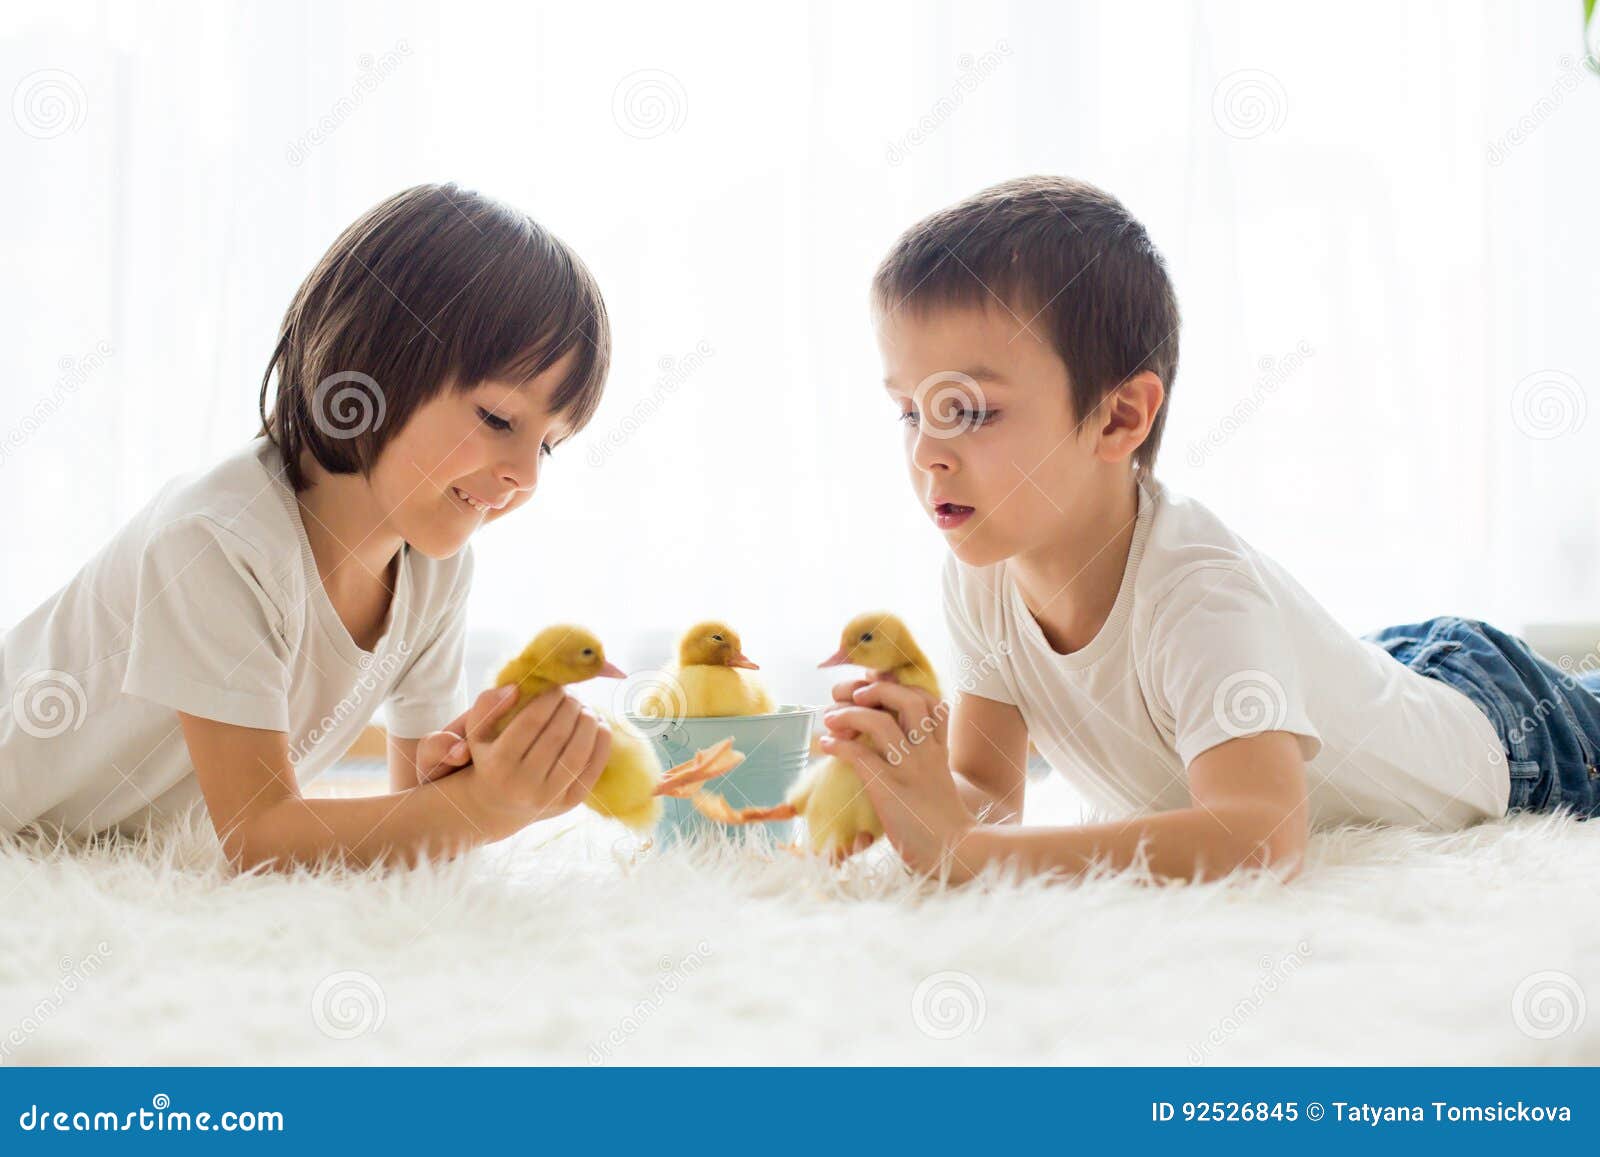 Cute Little Children, Boy Brothers, Playing with Ducklings Springtime ...